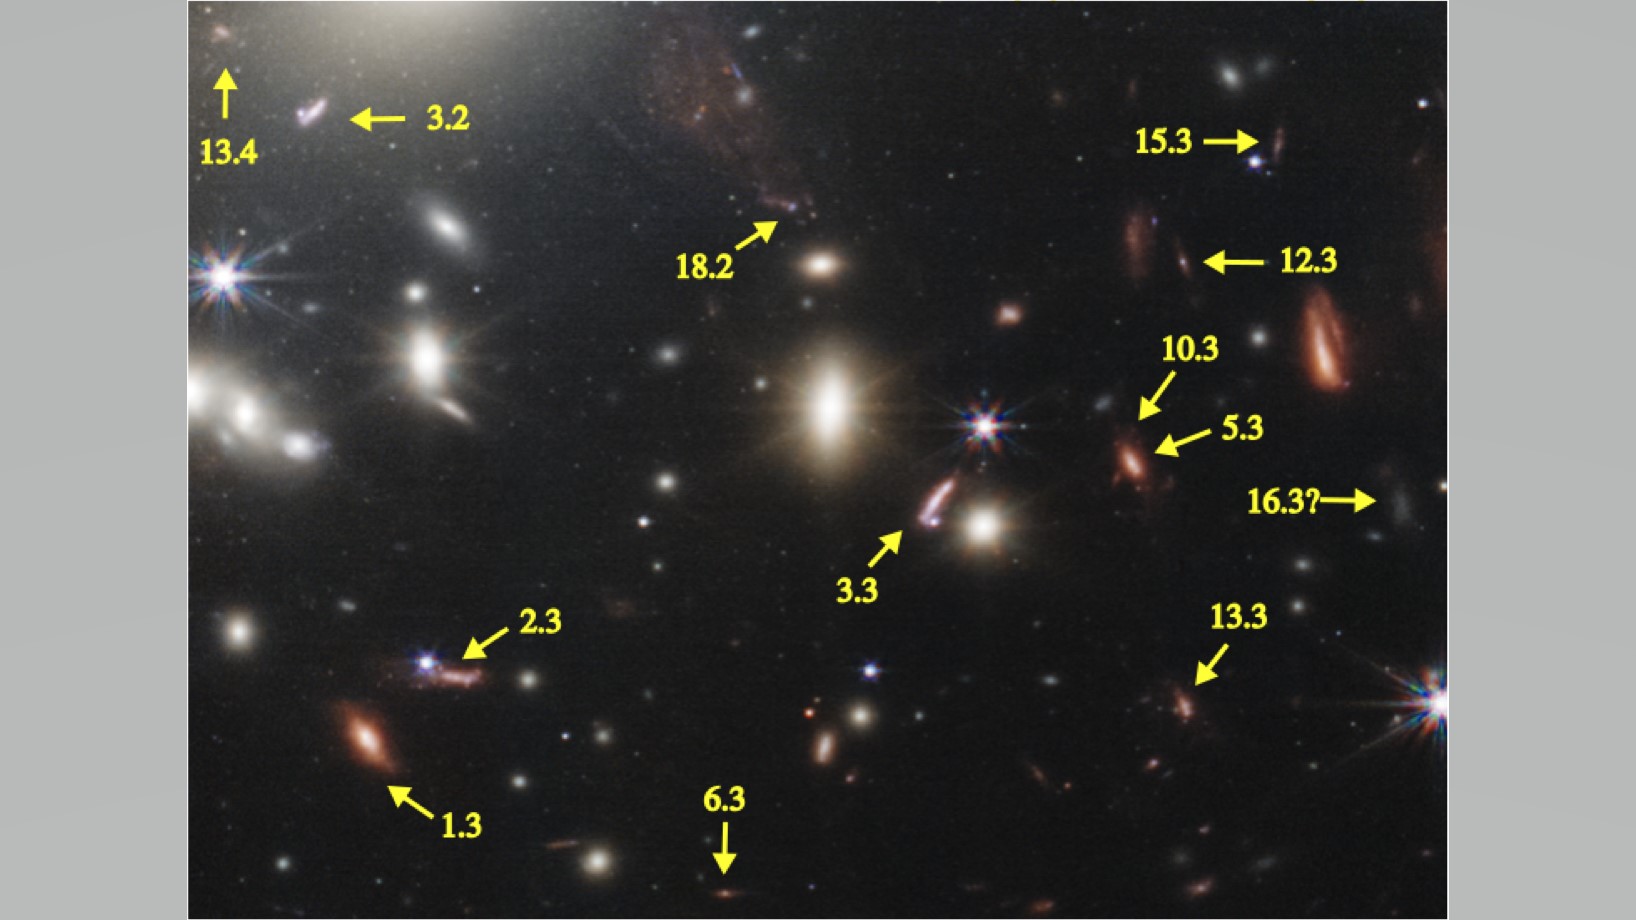 Arrows point to enlarged galaxies